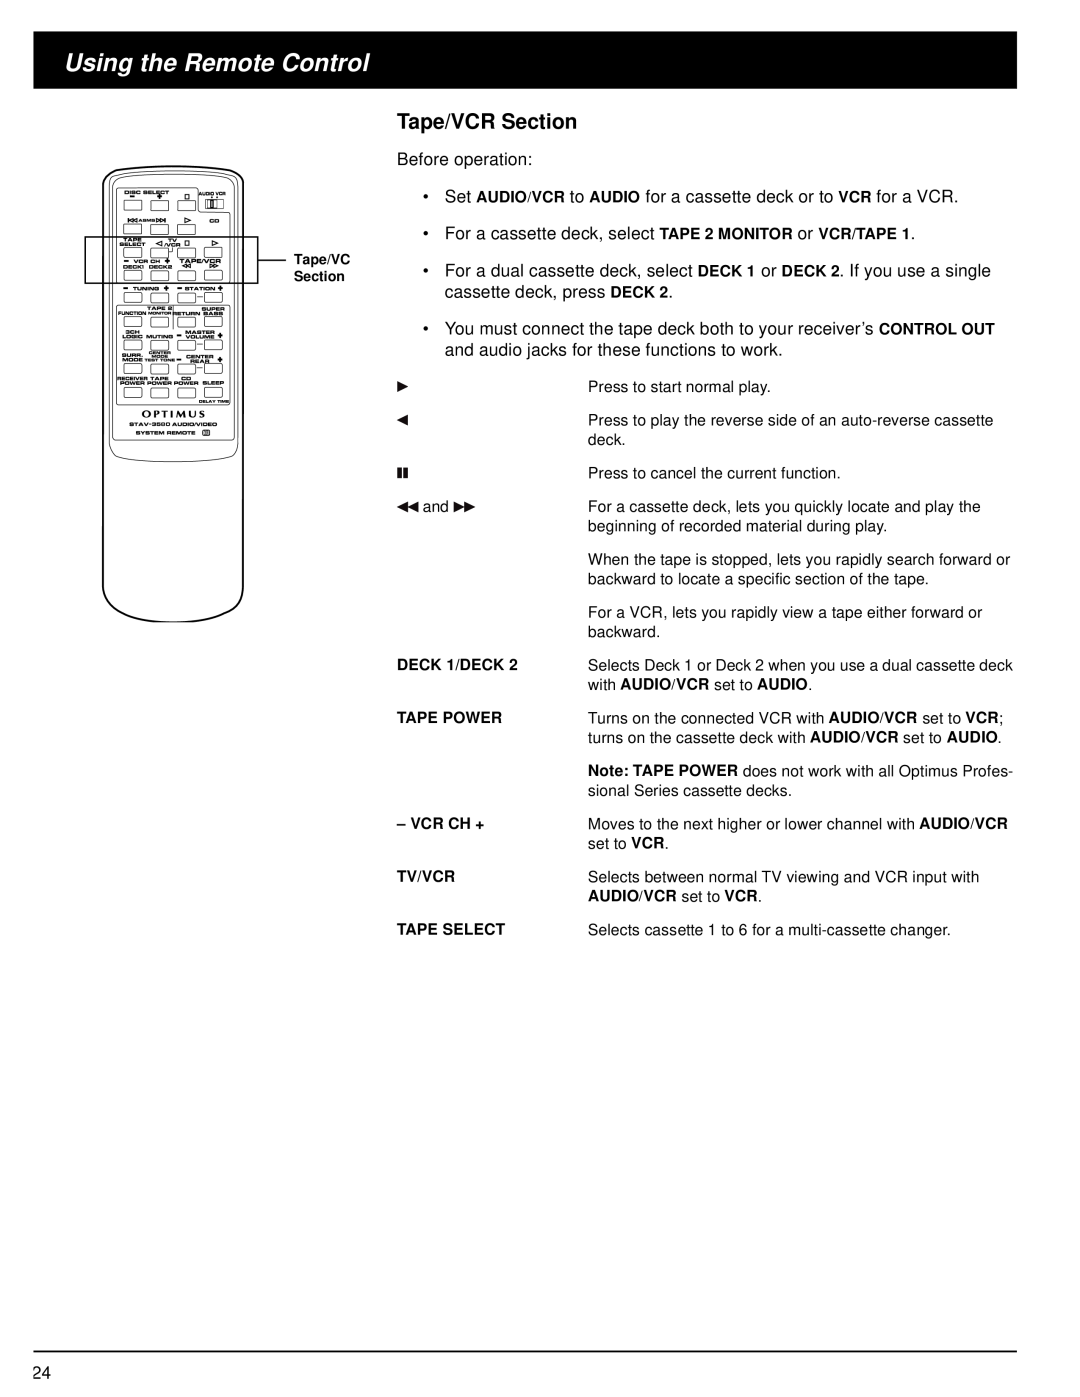 Optimus STAV-3580 owner manual Using the Remote Control, Tape/VCR Section 